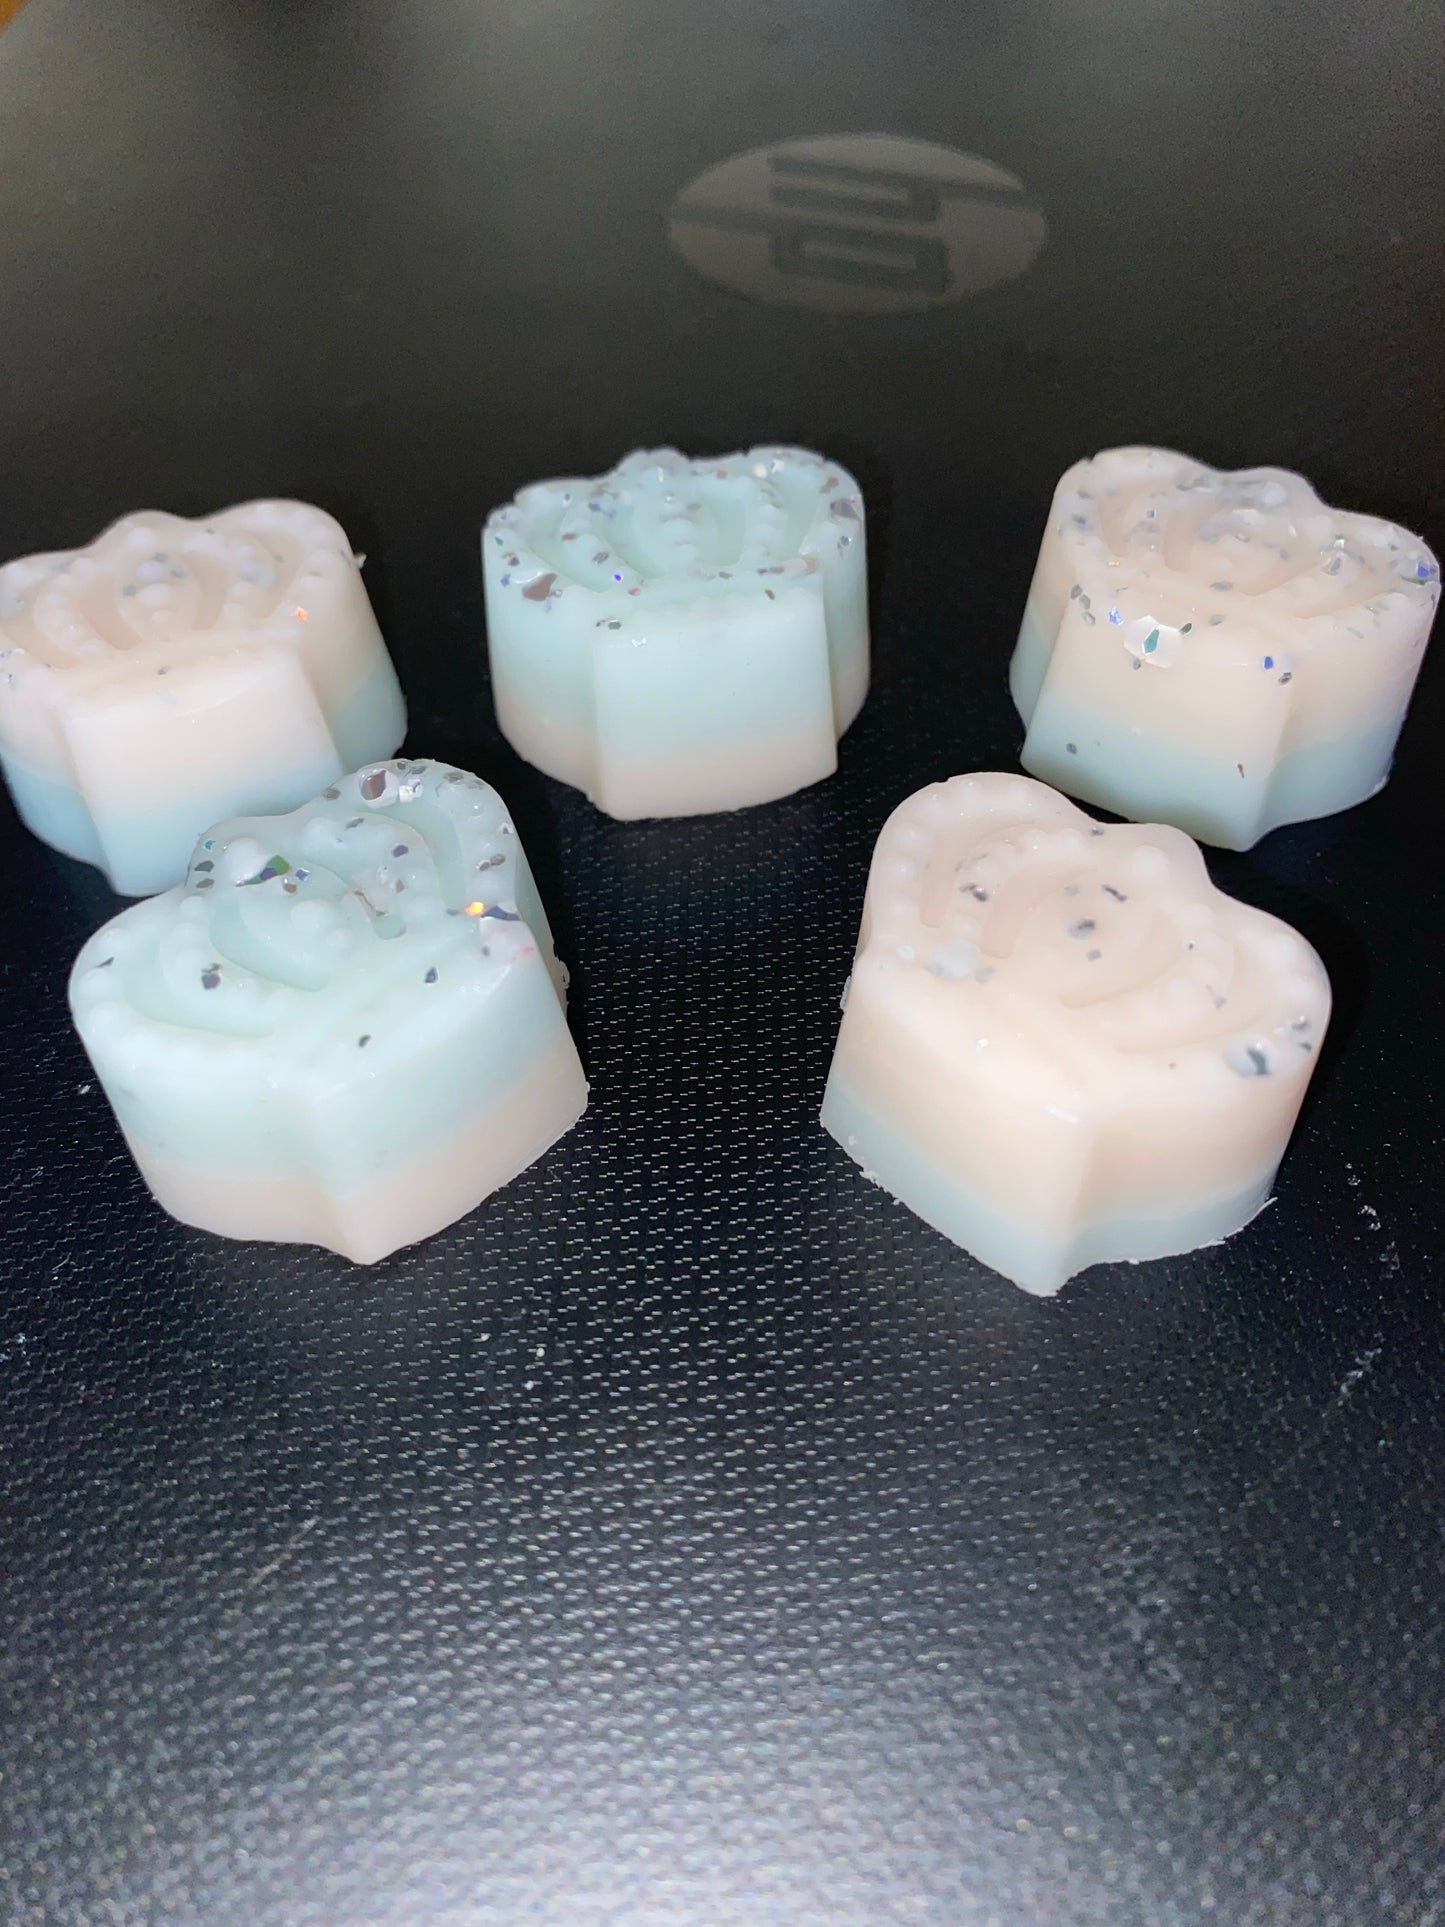 Crown shaped melts